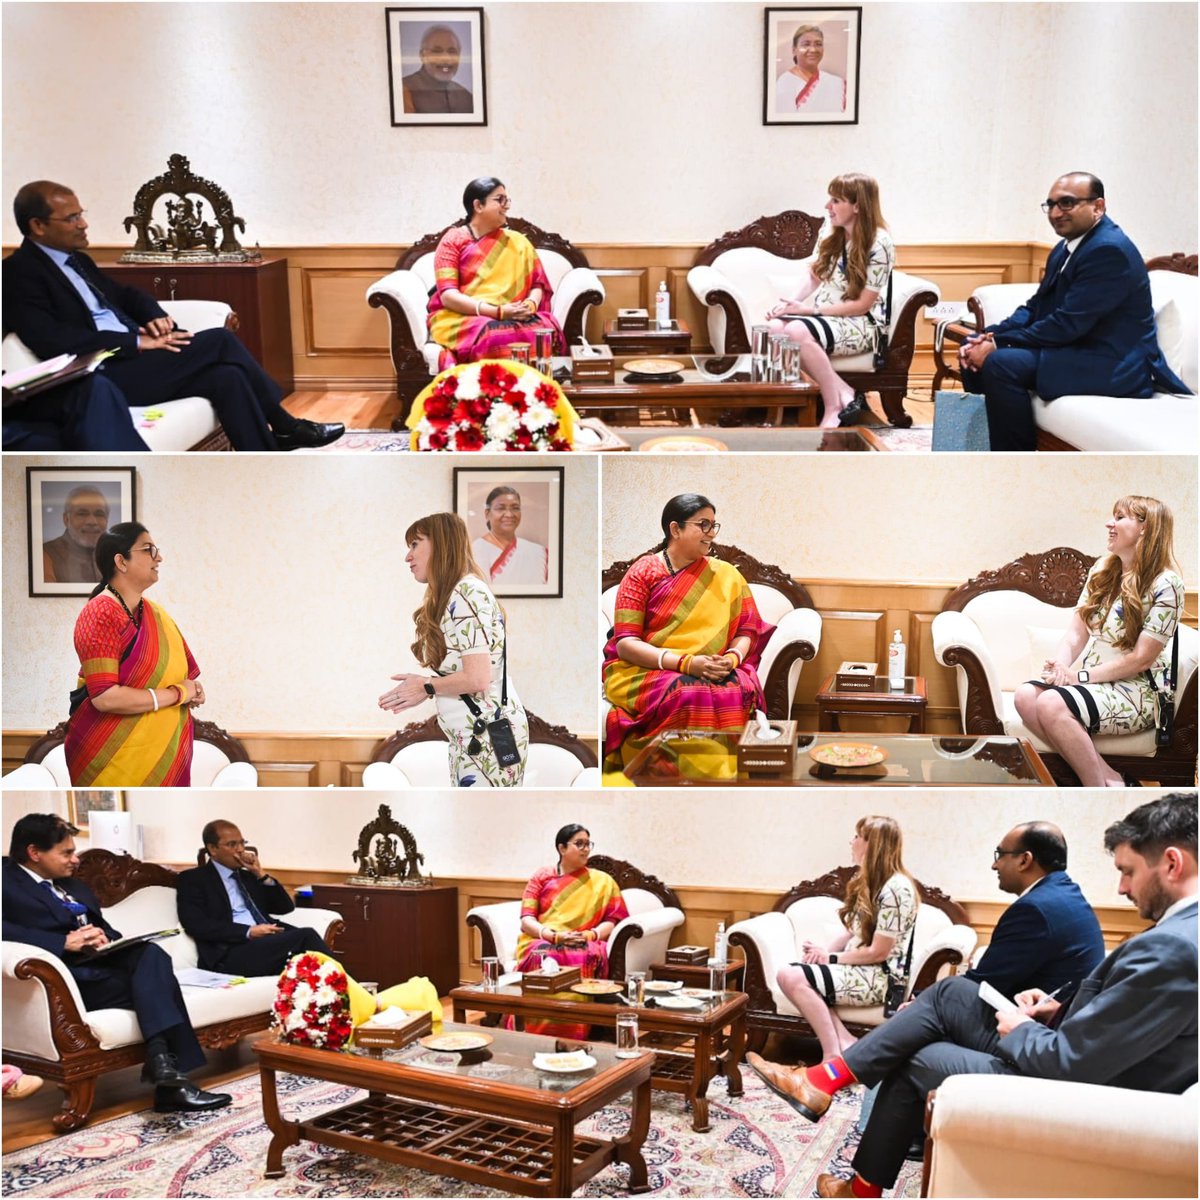 Had a fruitful discussion today with Ms. @AngelaRayner, Shadow Deputy Prime Minister & Deputy Leader of the Labour Party, United Kingdom. She lauded India’s governmental initiatives on constructively addressing issues relating to the well-rounded development of women and